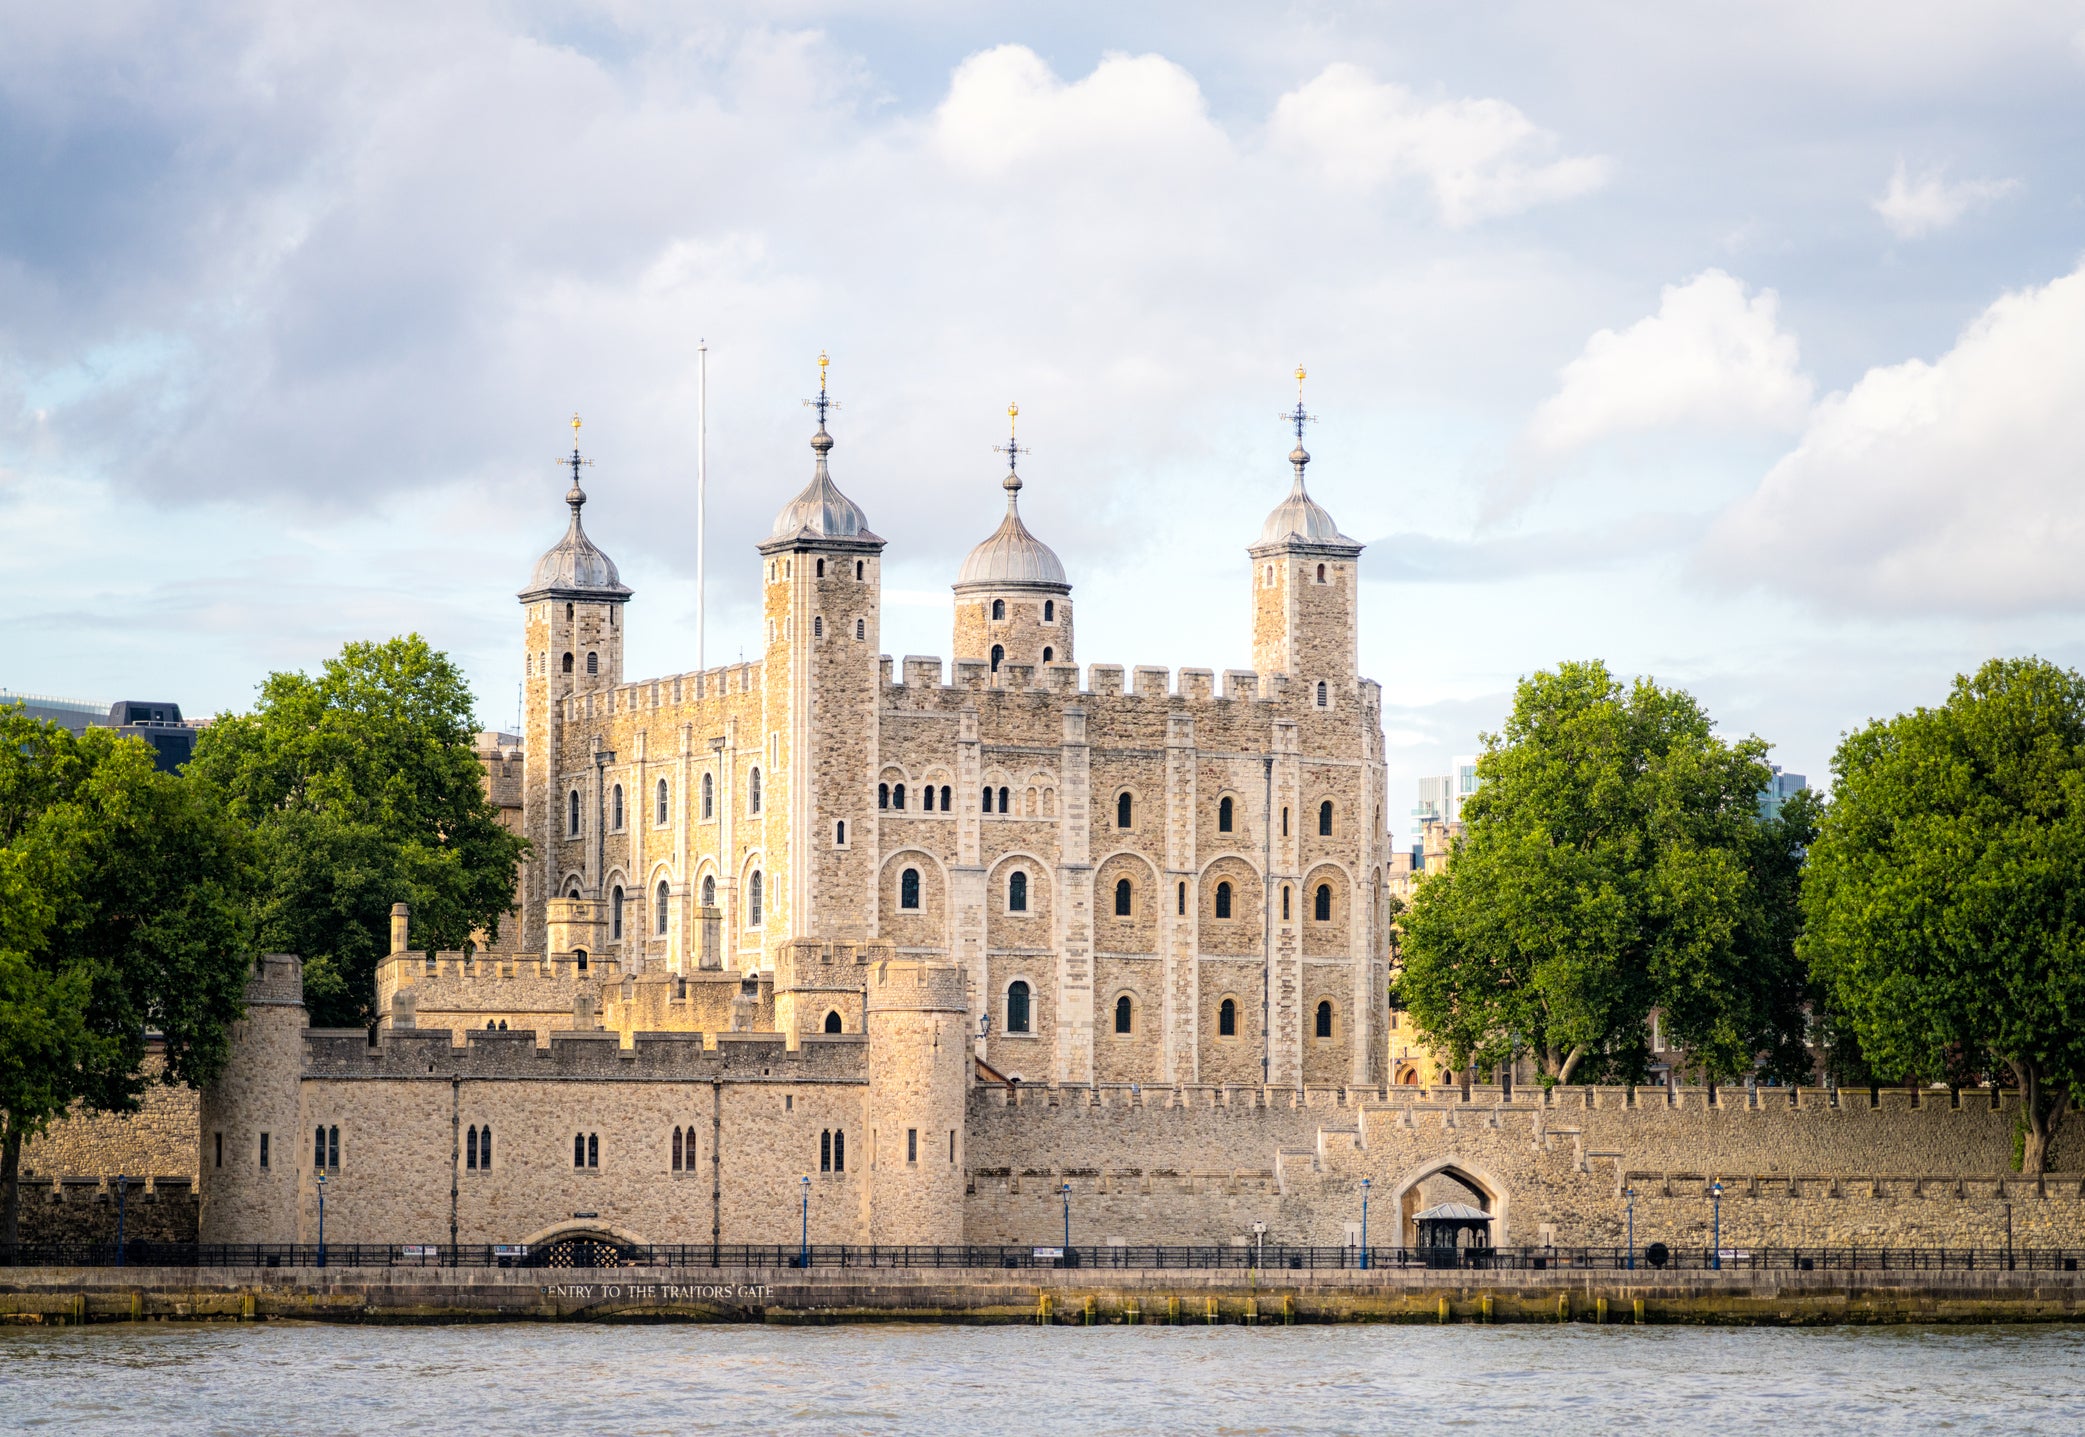 A view of the Tower of London from across the River Thames